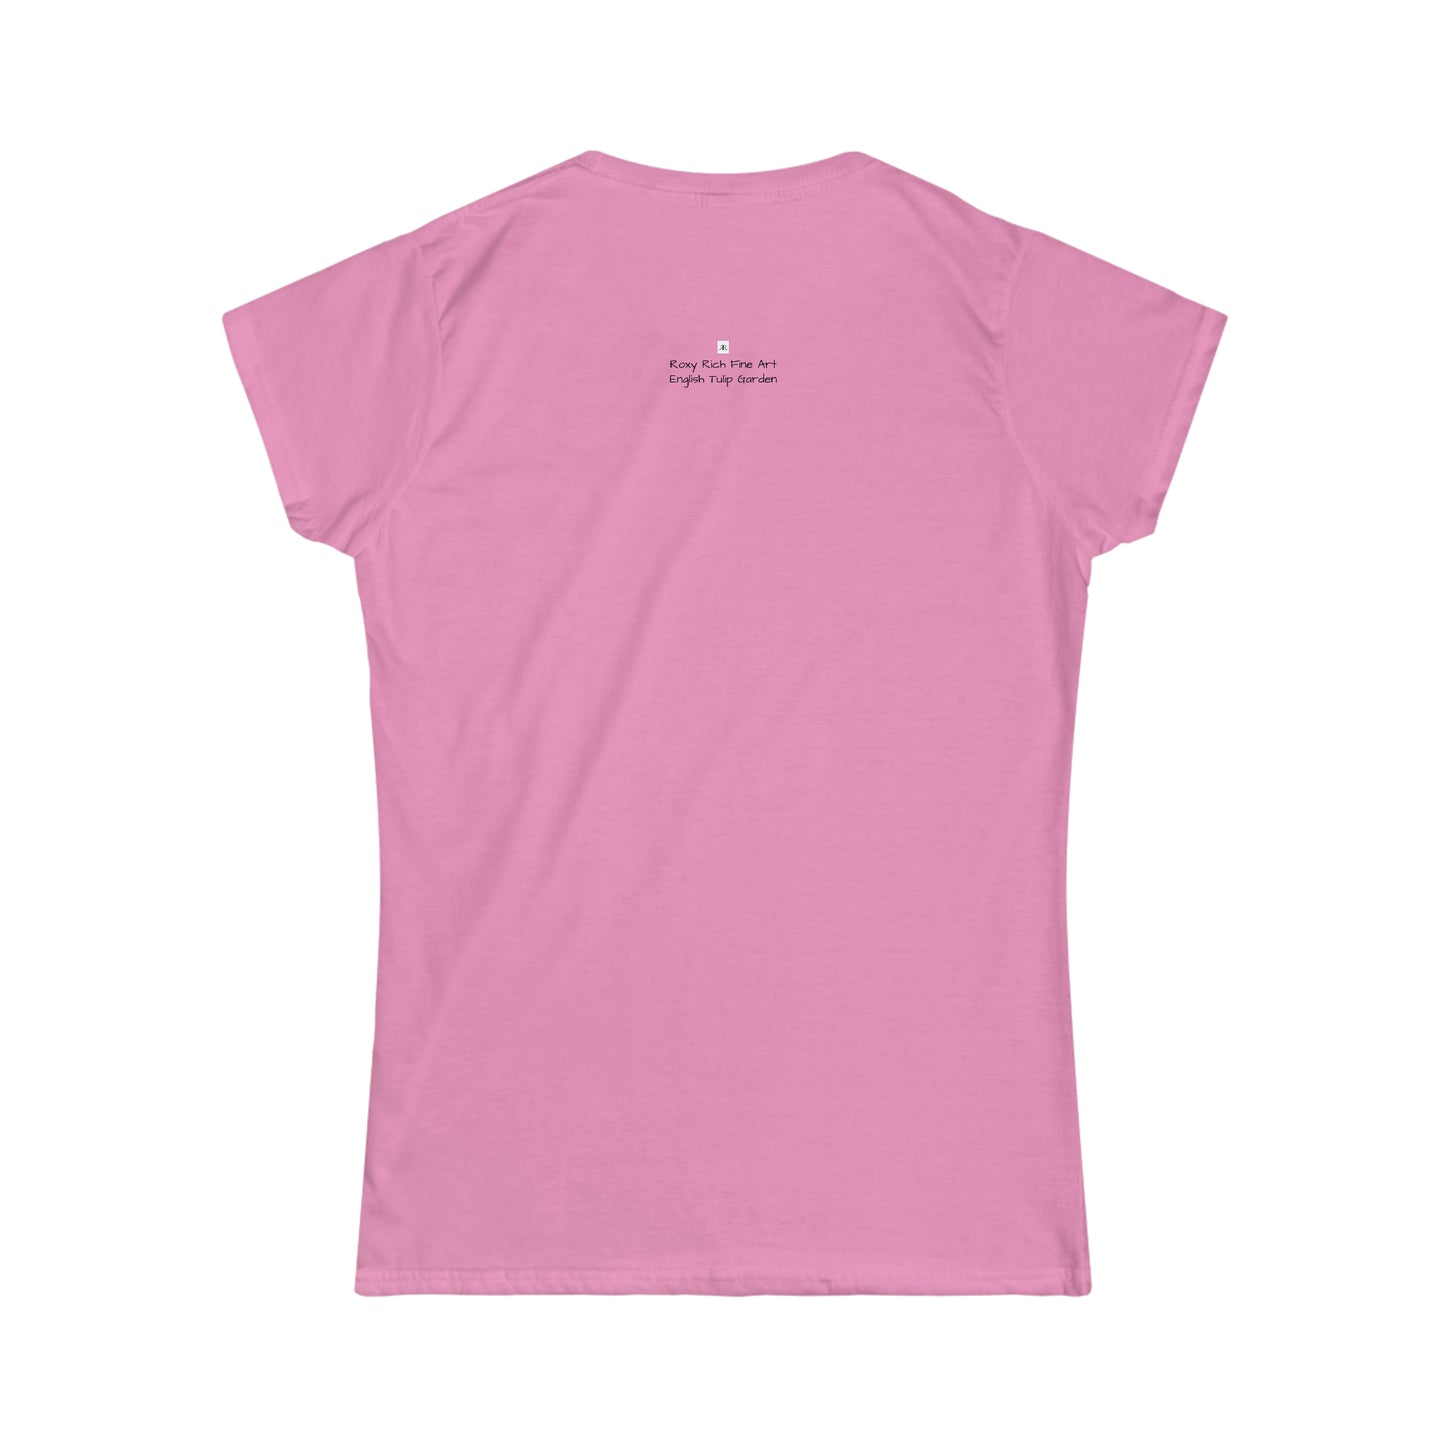 English Tulip Garden Women's Softstyle  Semi-Fitted Tee (5 colors)